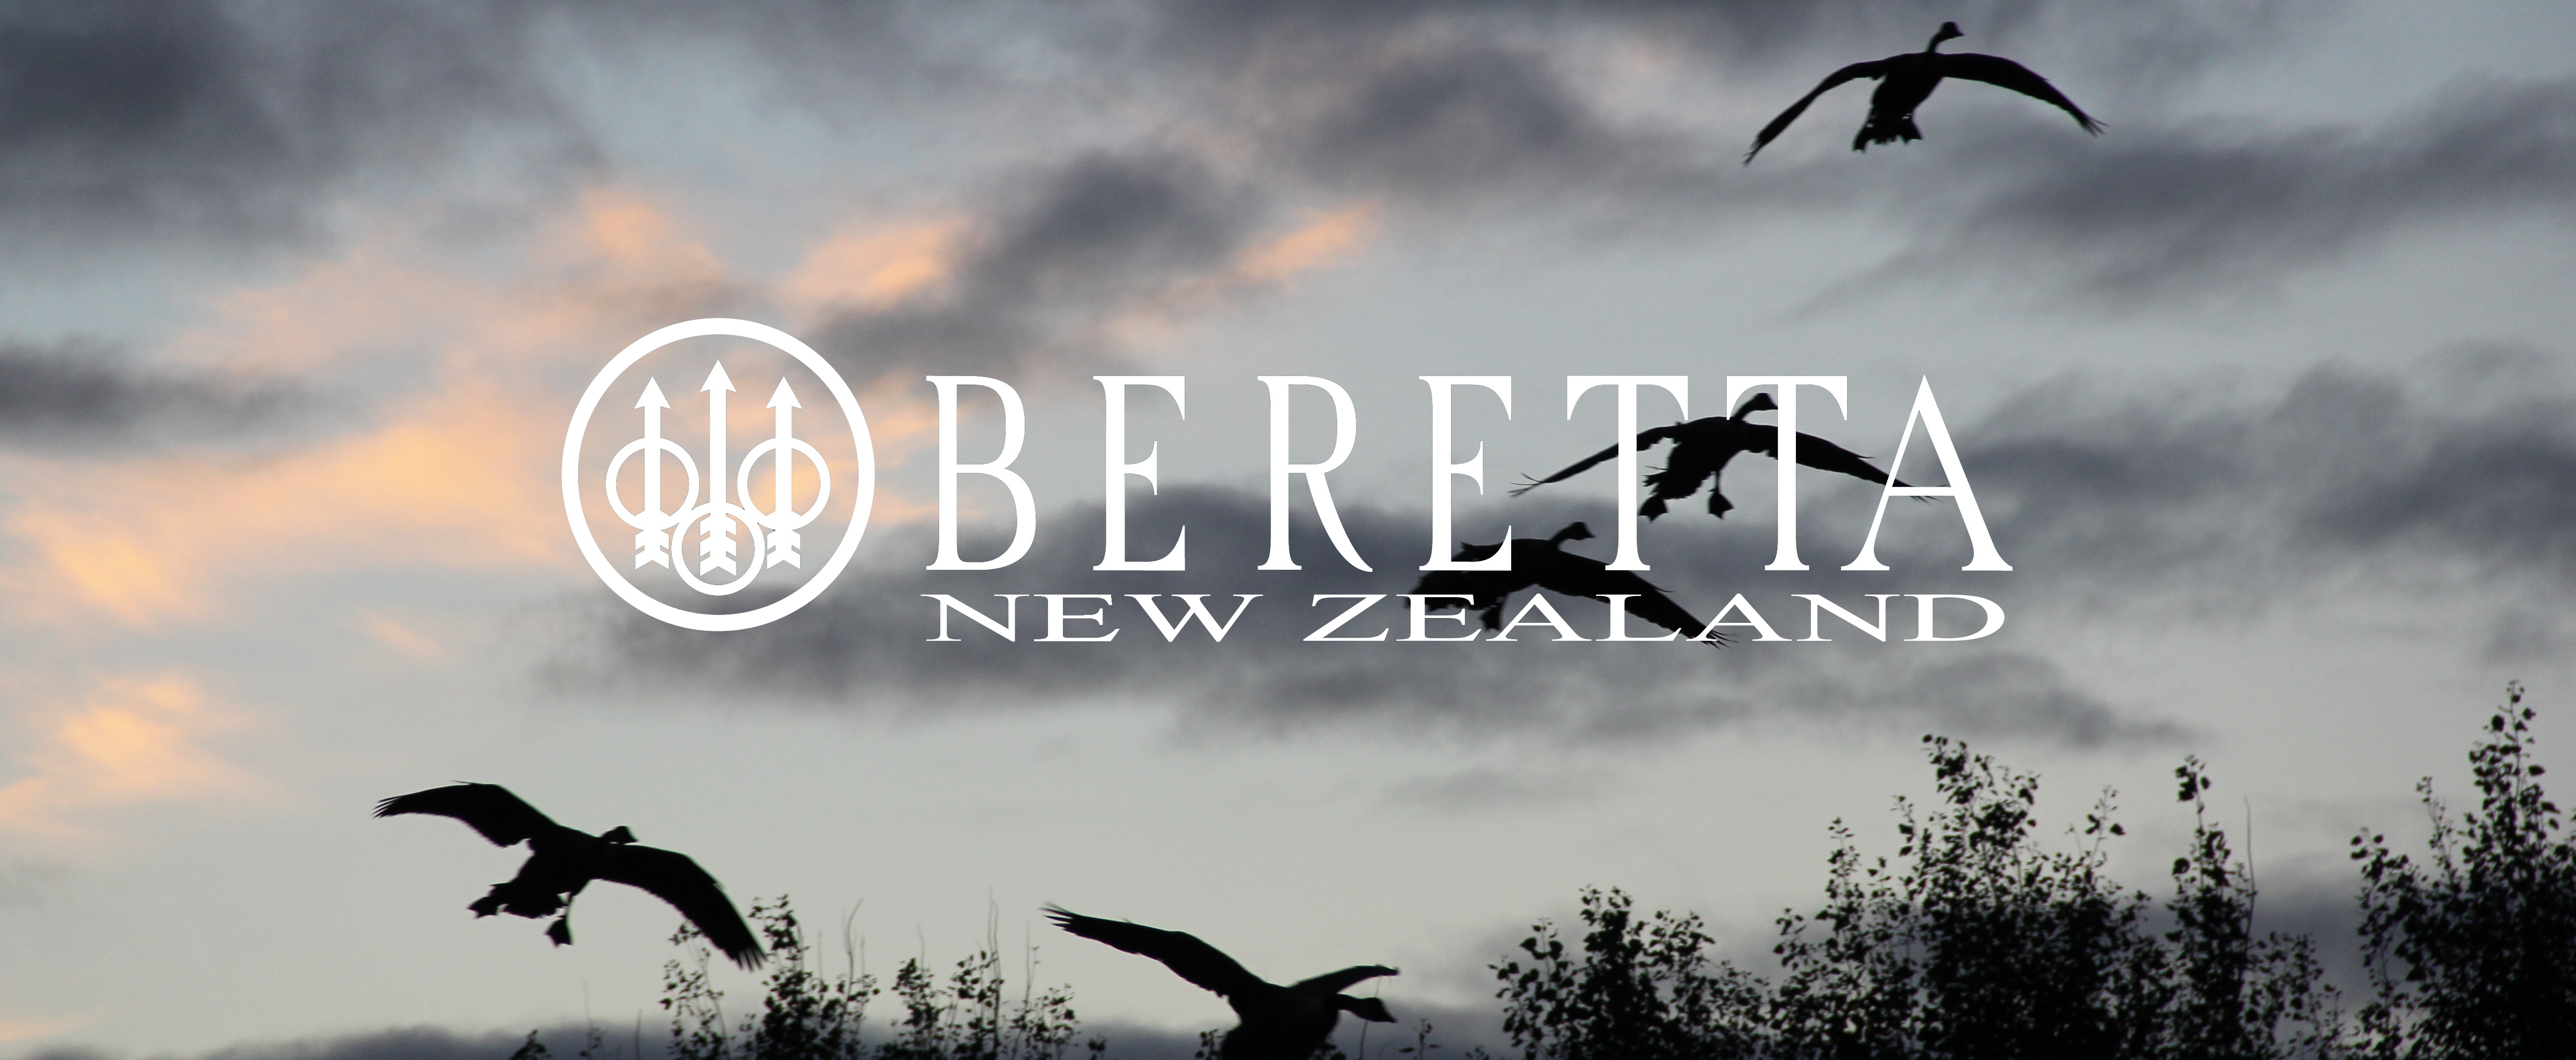 Beretta New Zealand Our Story